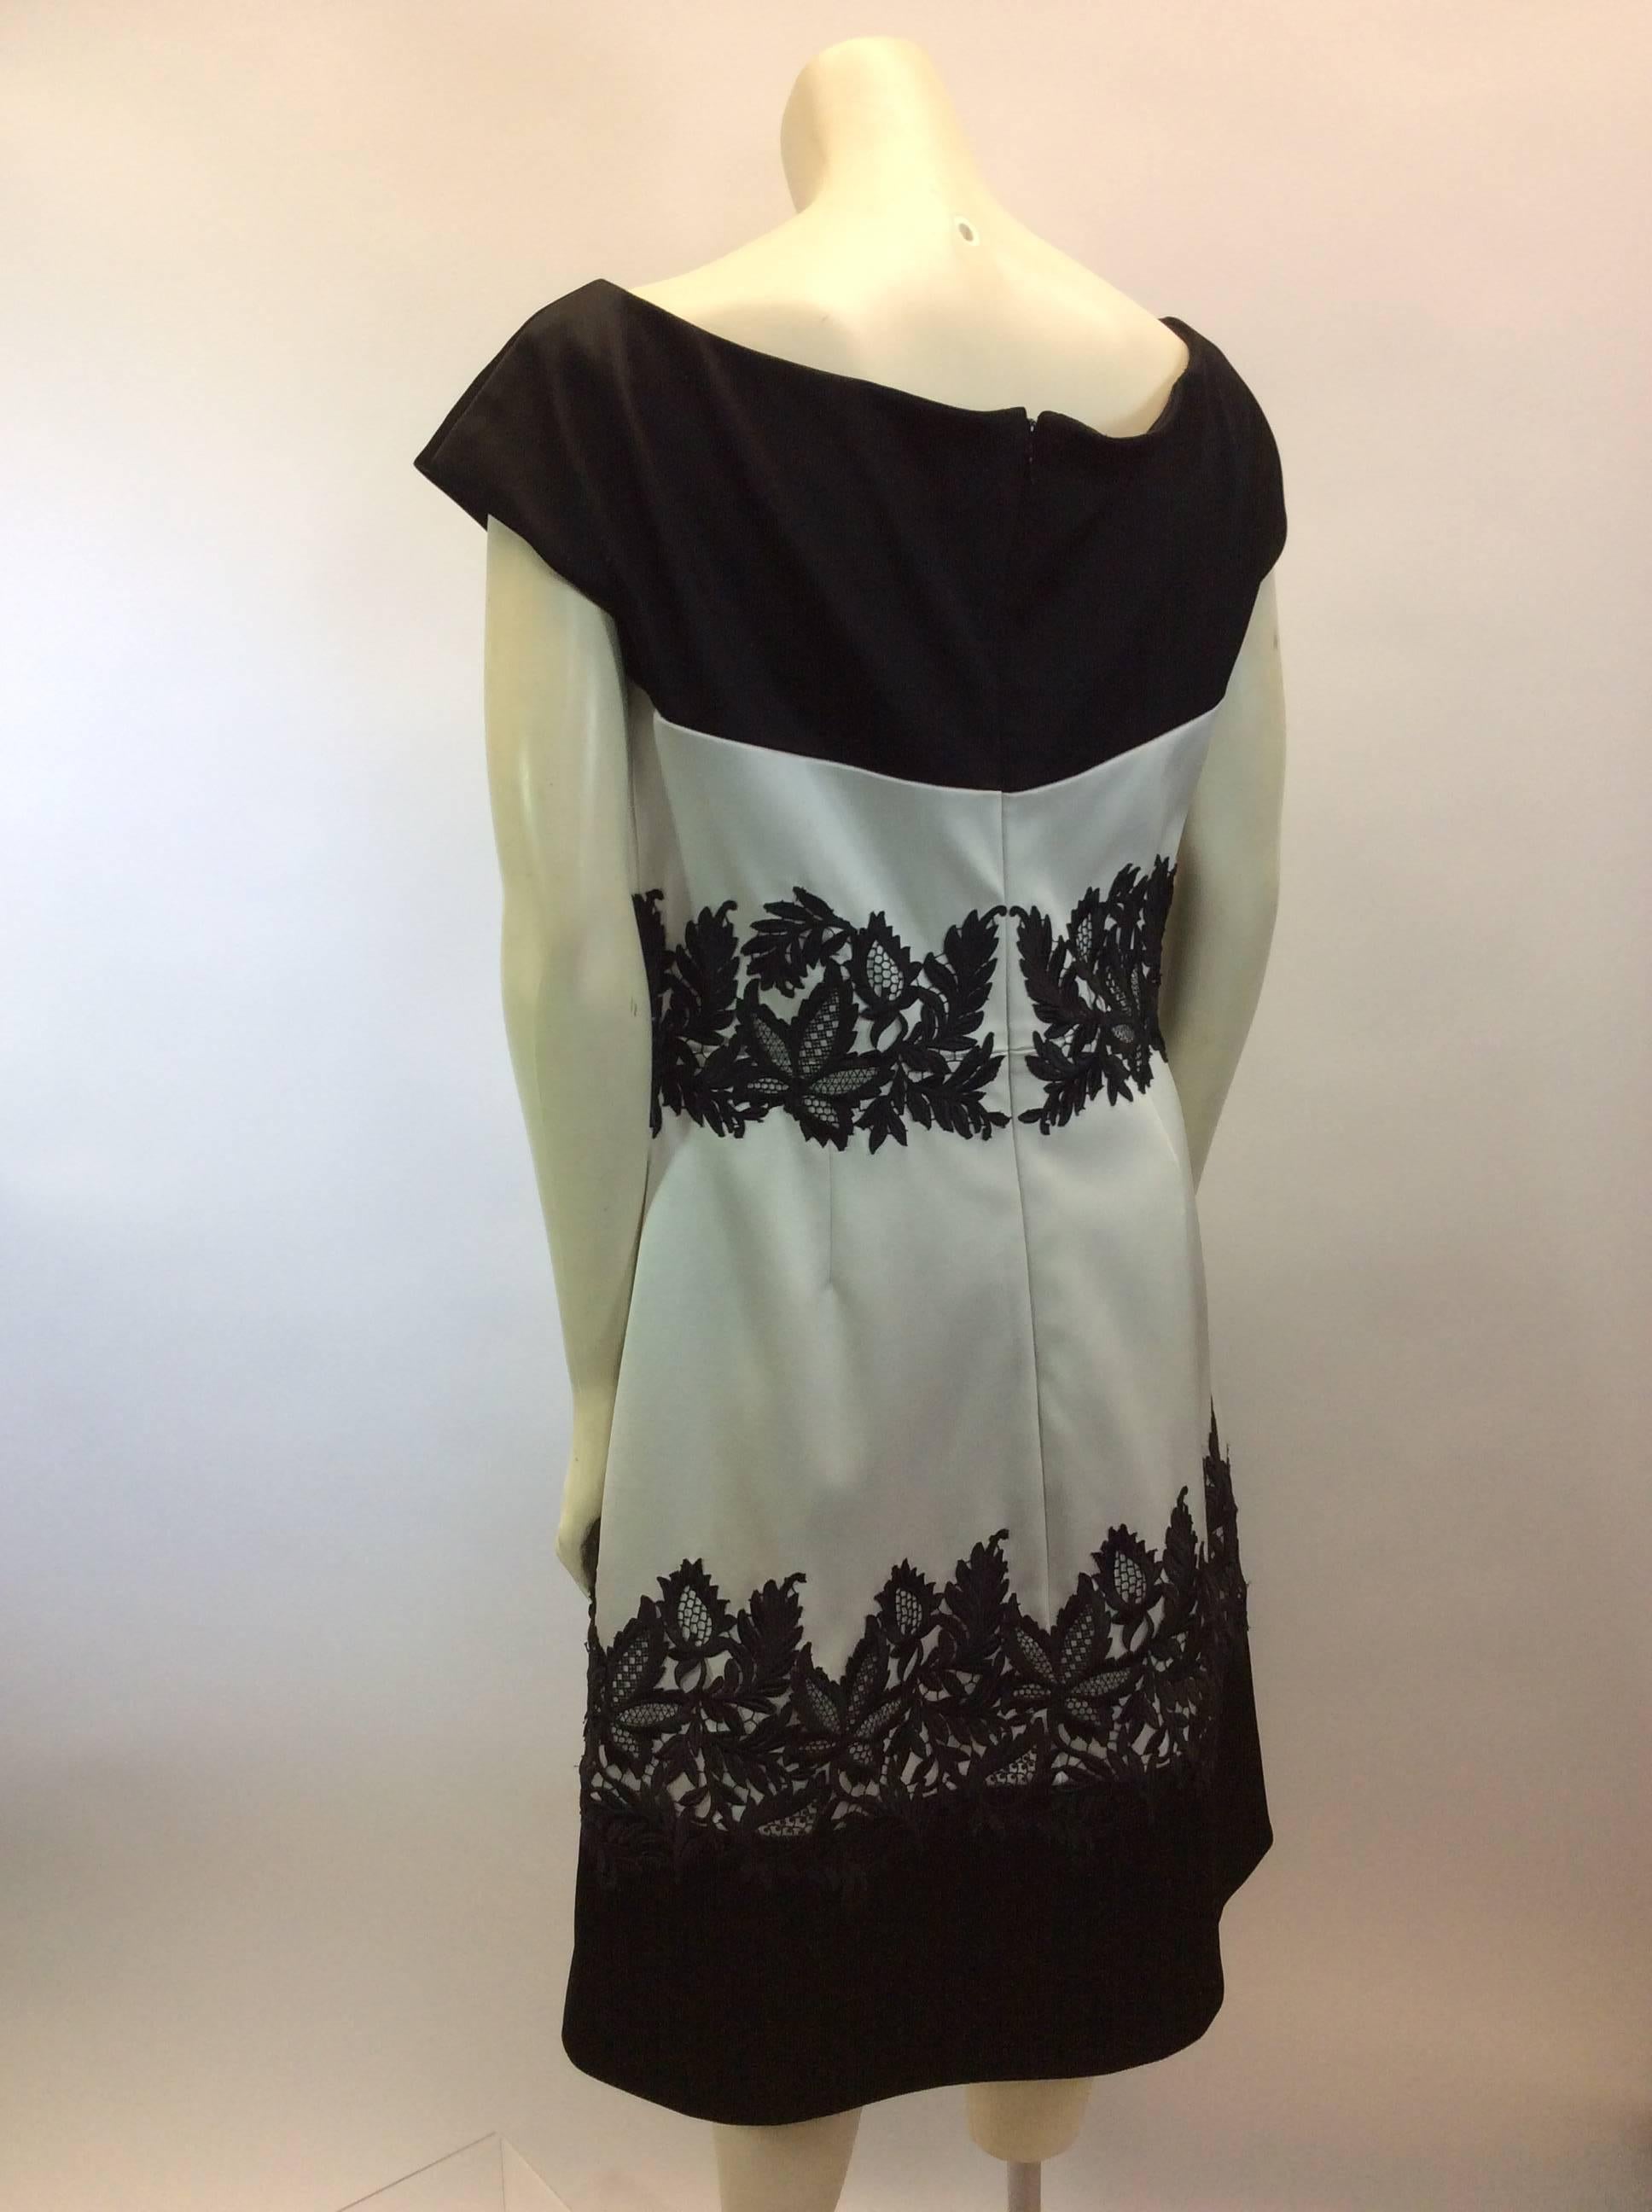 J. Mendel White and Black Lace Dress In Excellent Condition For Sale In Narberth, PA